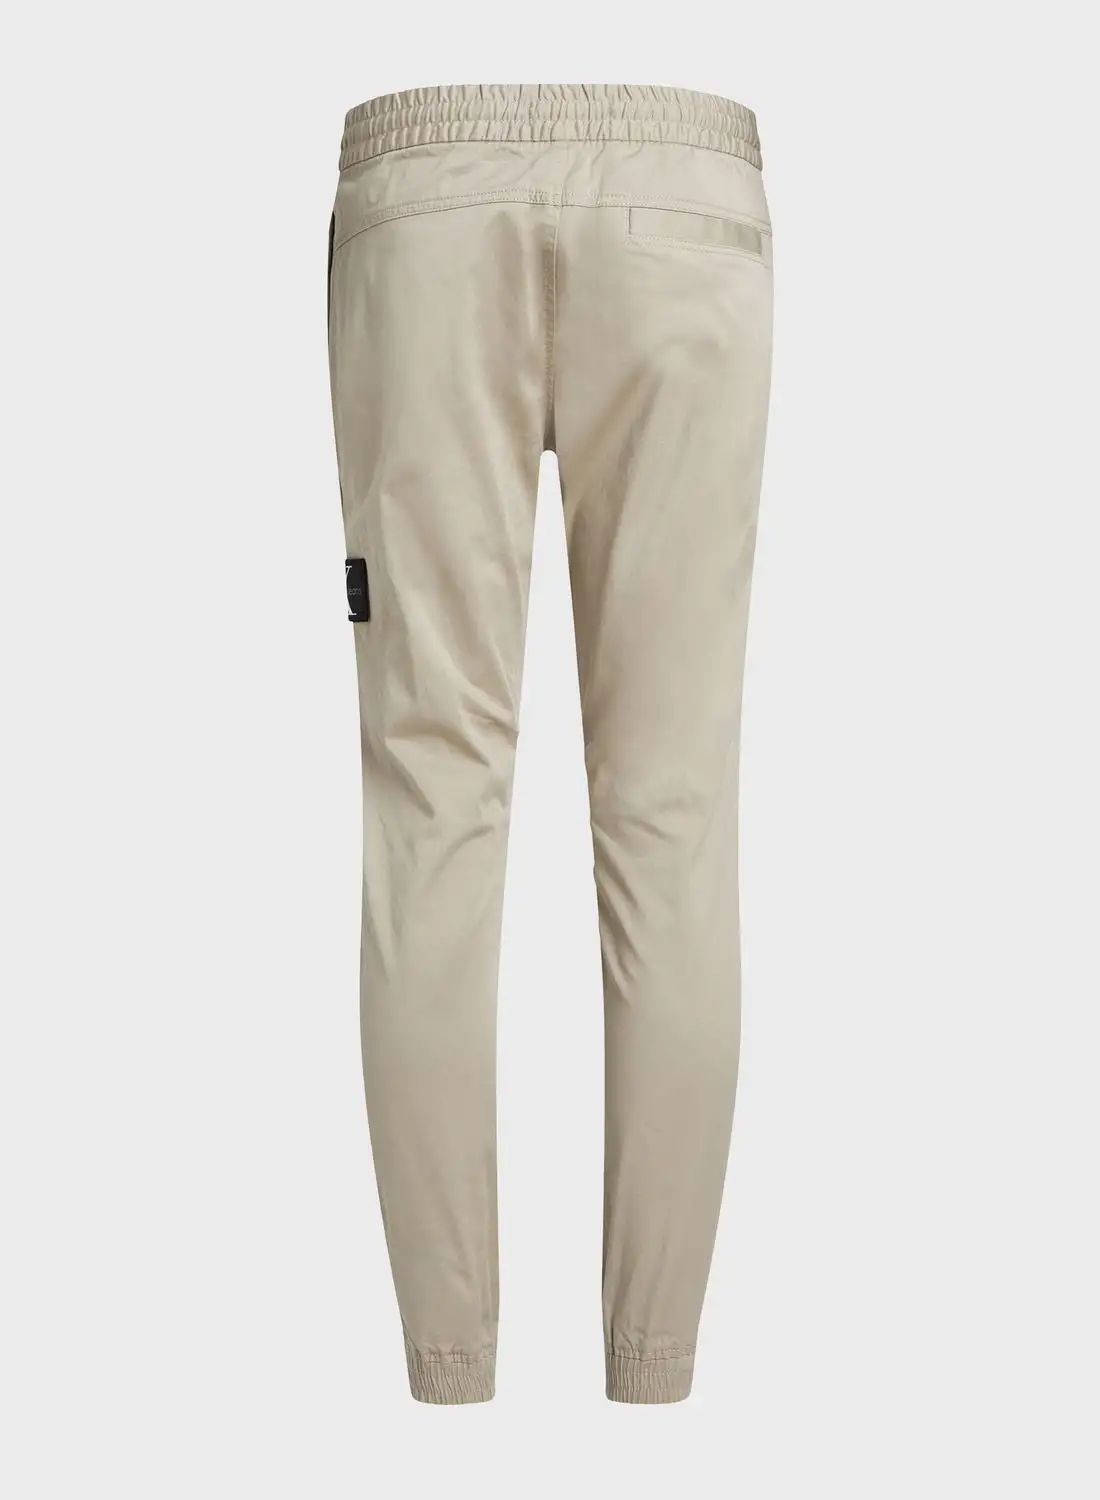 Calvin Klein Jeans Casual Badge Chinos